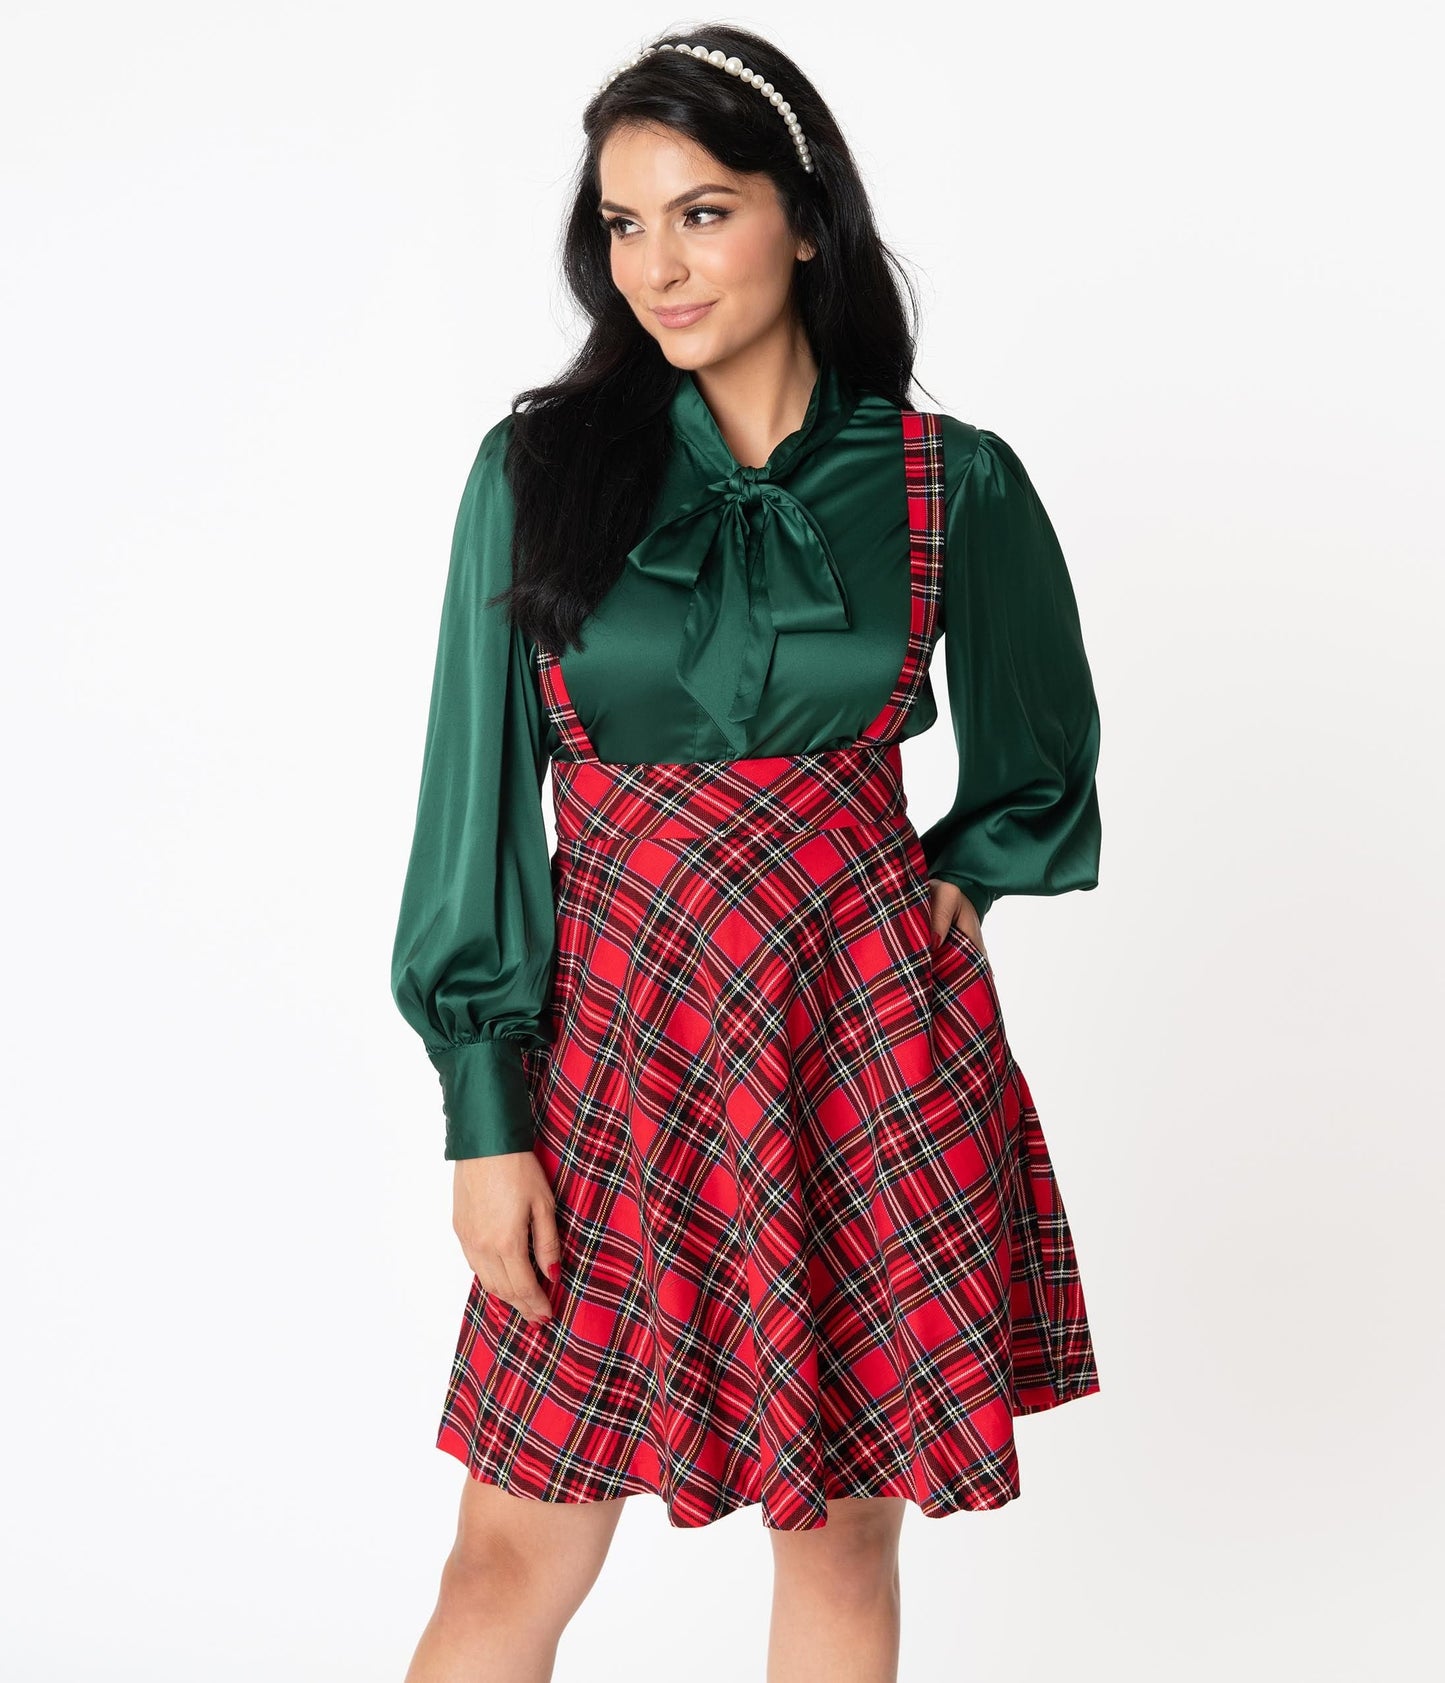 Unique Vintage 1960s Style Red Plaid Suspender Ruth Flare Skirt